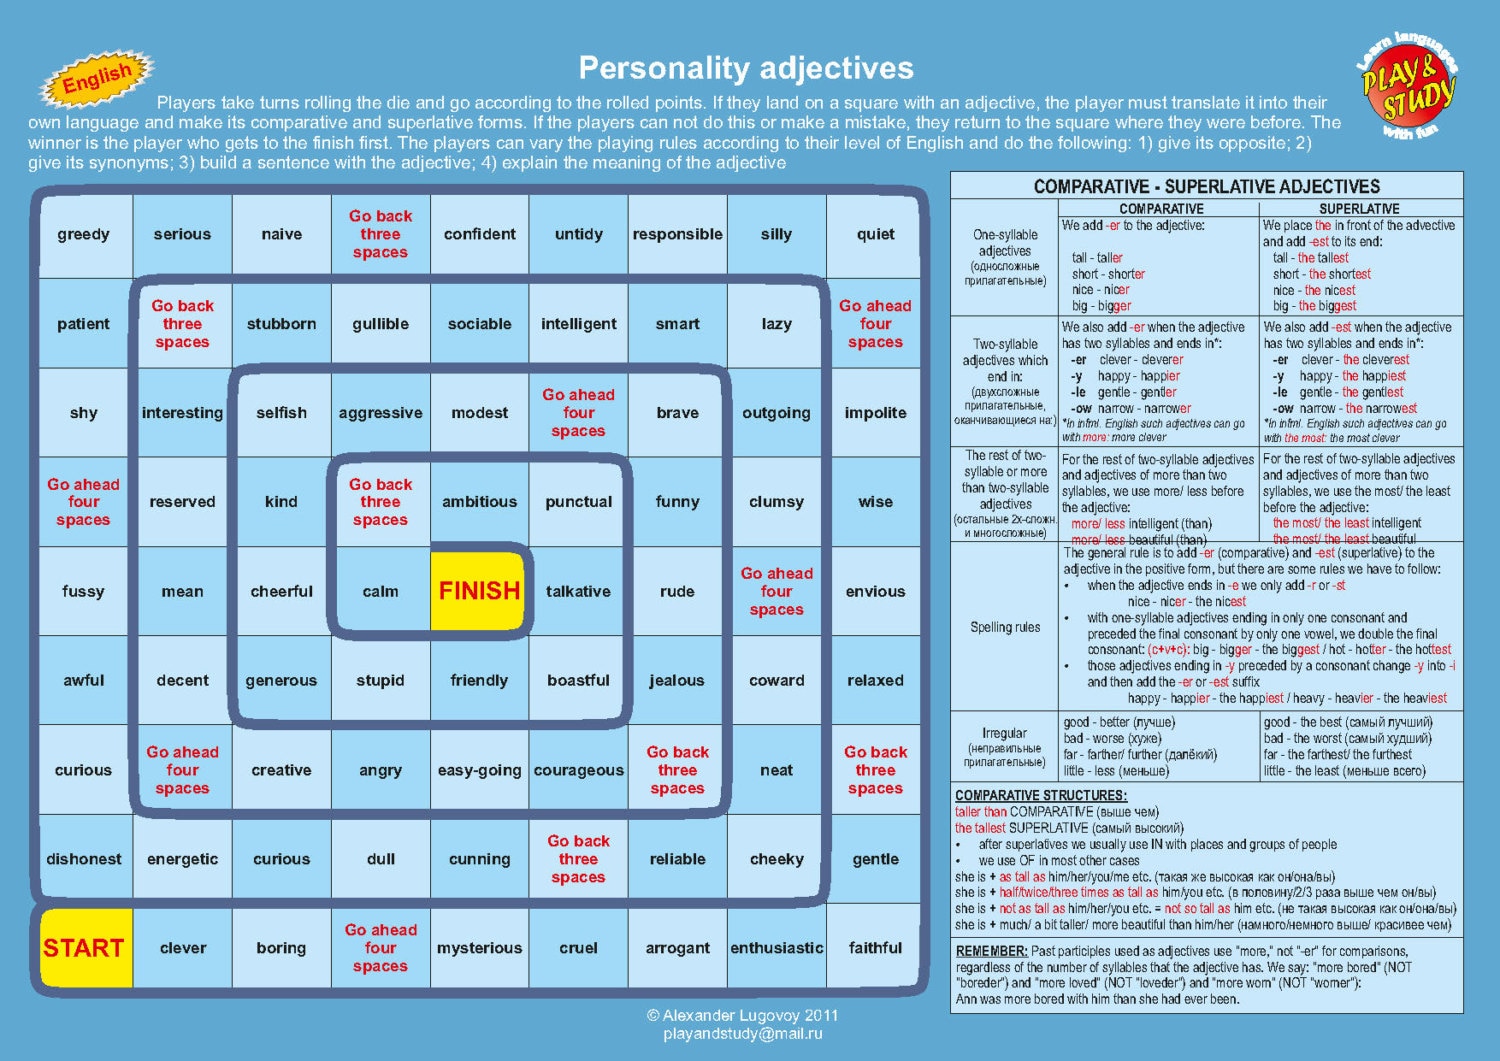 The adjective is games. Игры degrees of Comparison. Comparatives Board game. Comparative adjectives игра. Игры на Comparatives and Superlatives.